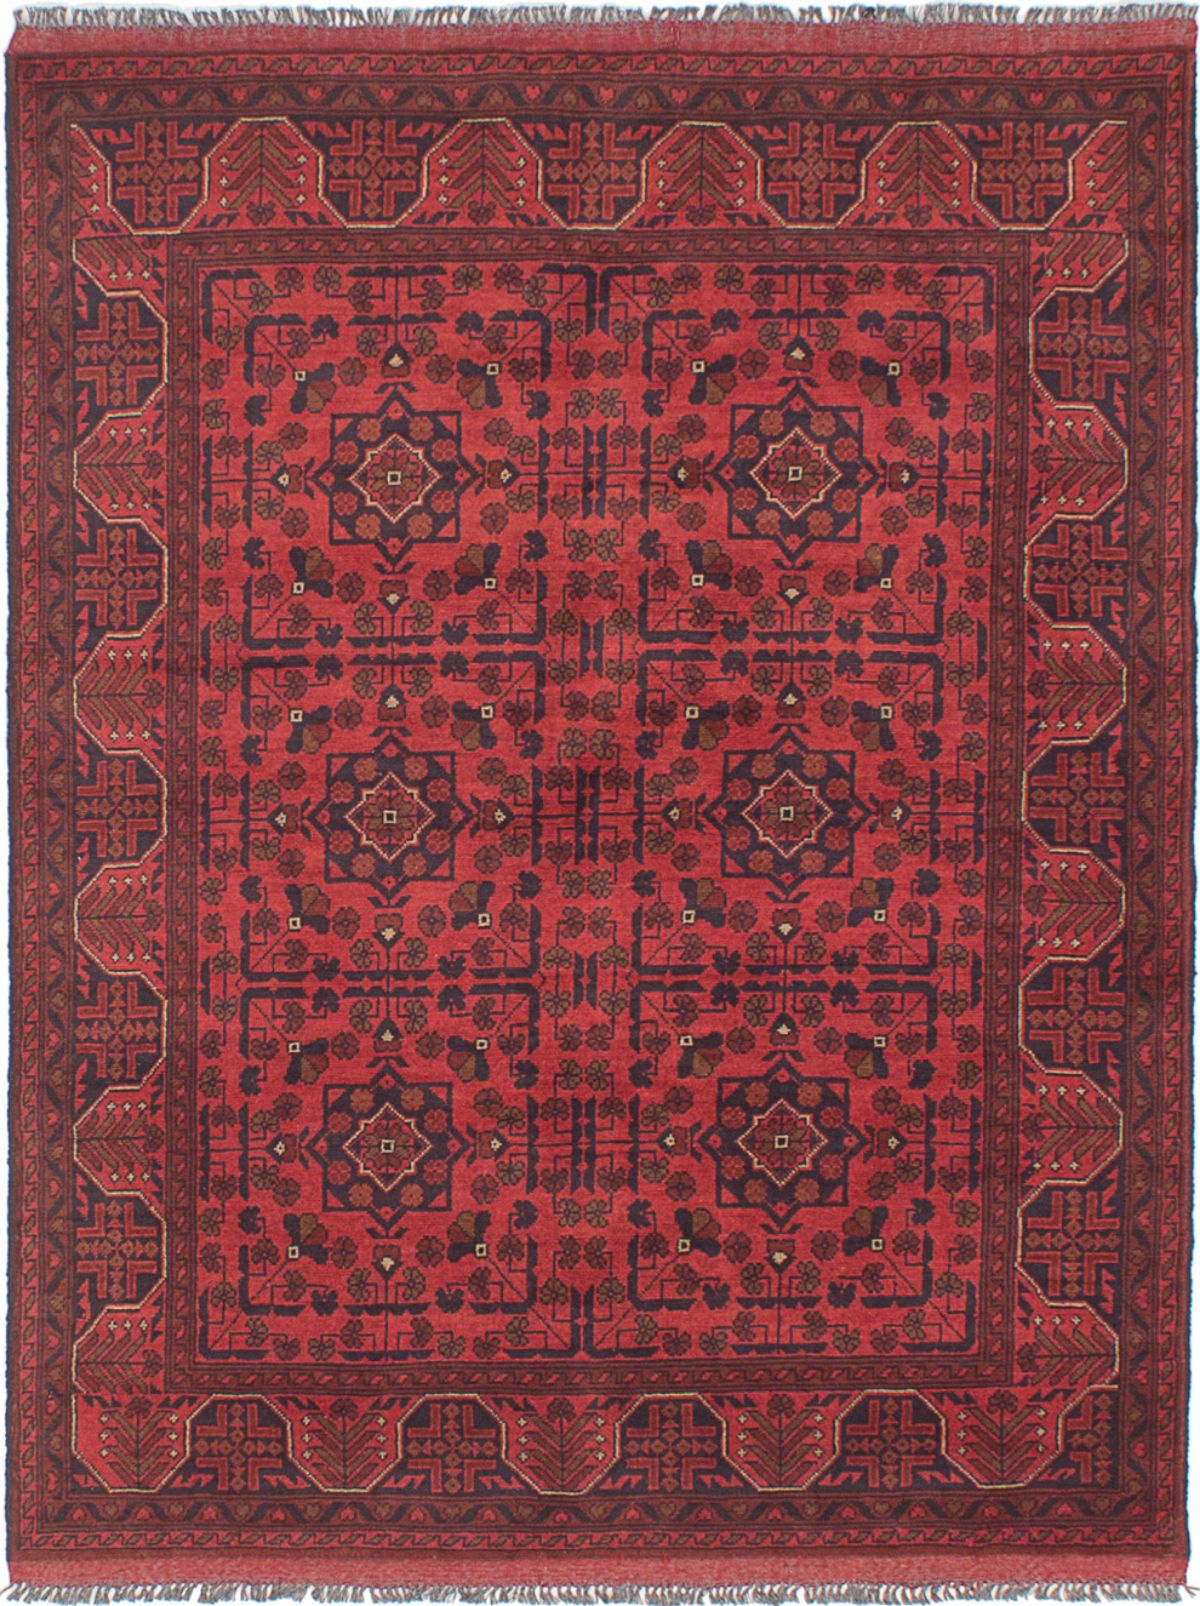 Hand-knotted Finest Khal Mohammadi Red Wool Rug 4'11" x 6'3"  Size: 4'11" x 6'3"  